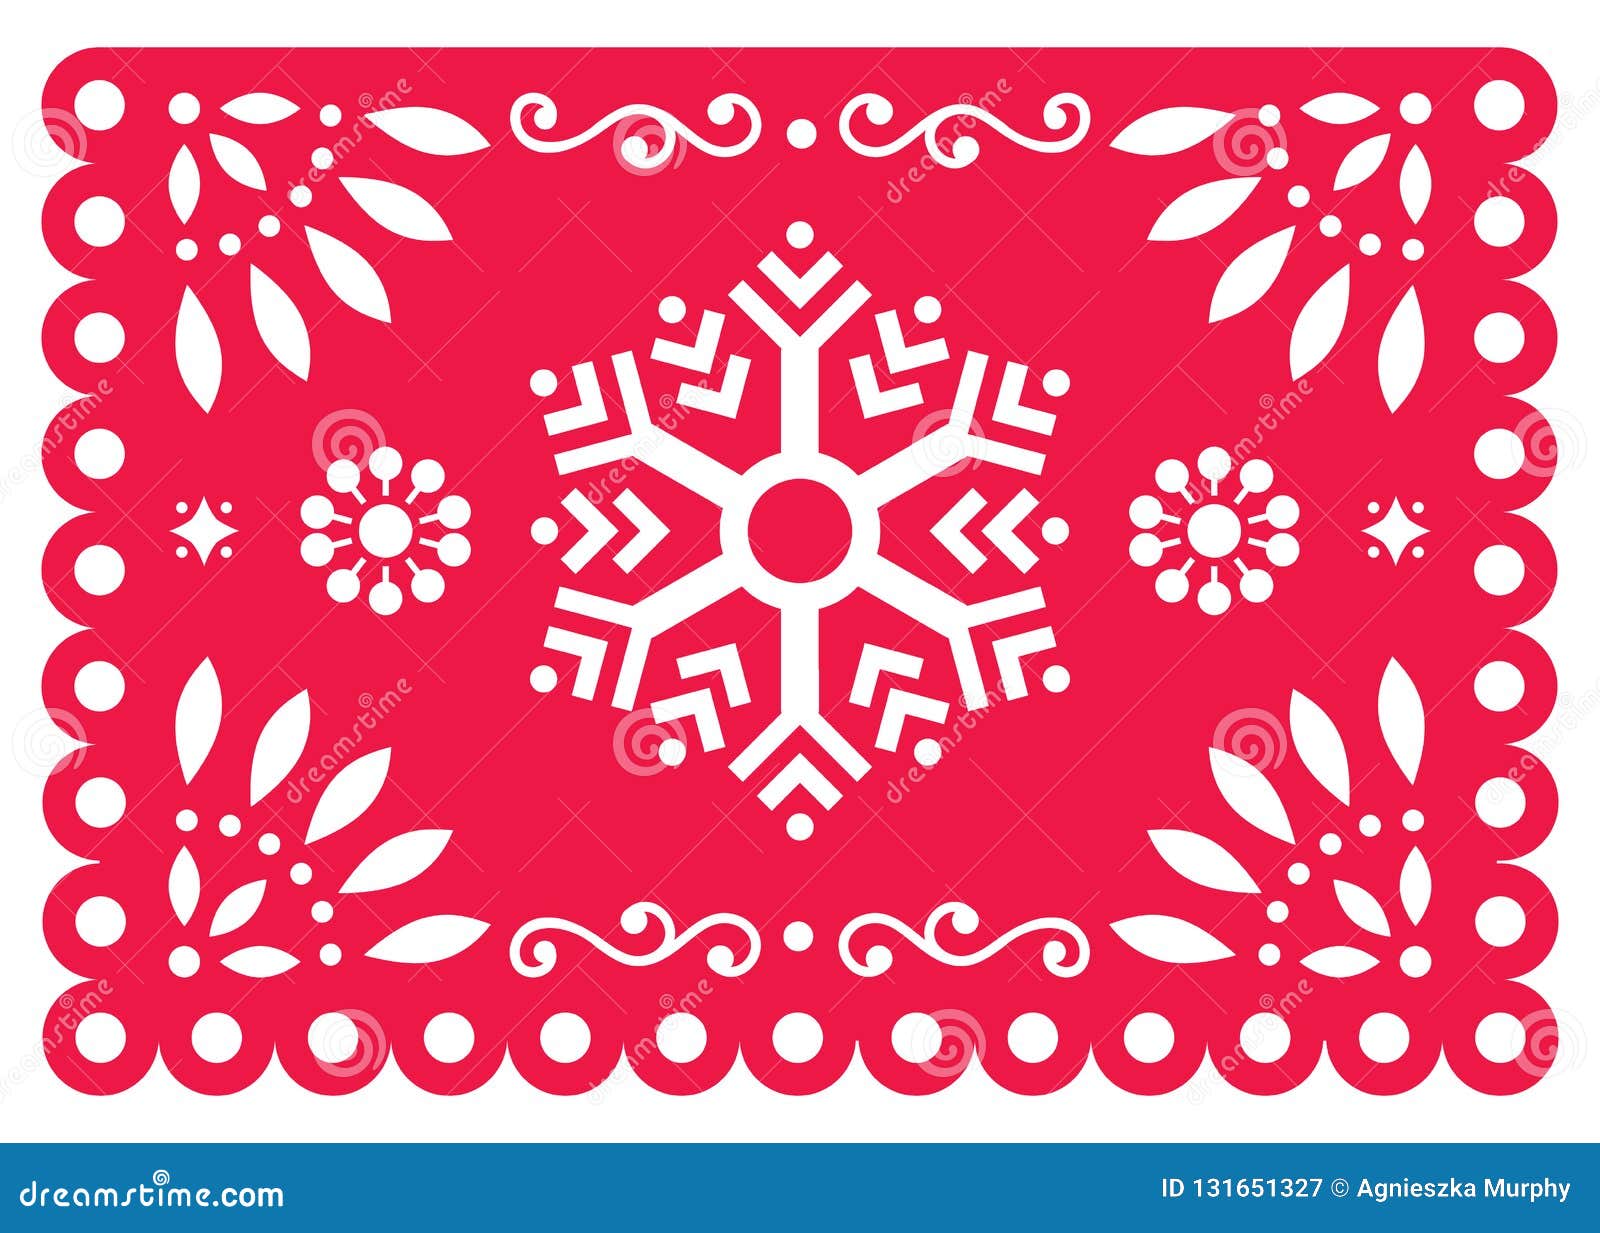 Red Christmas snowflake Print Paper Christmas utenciles party